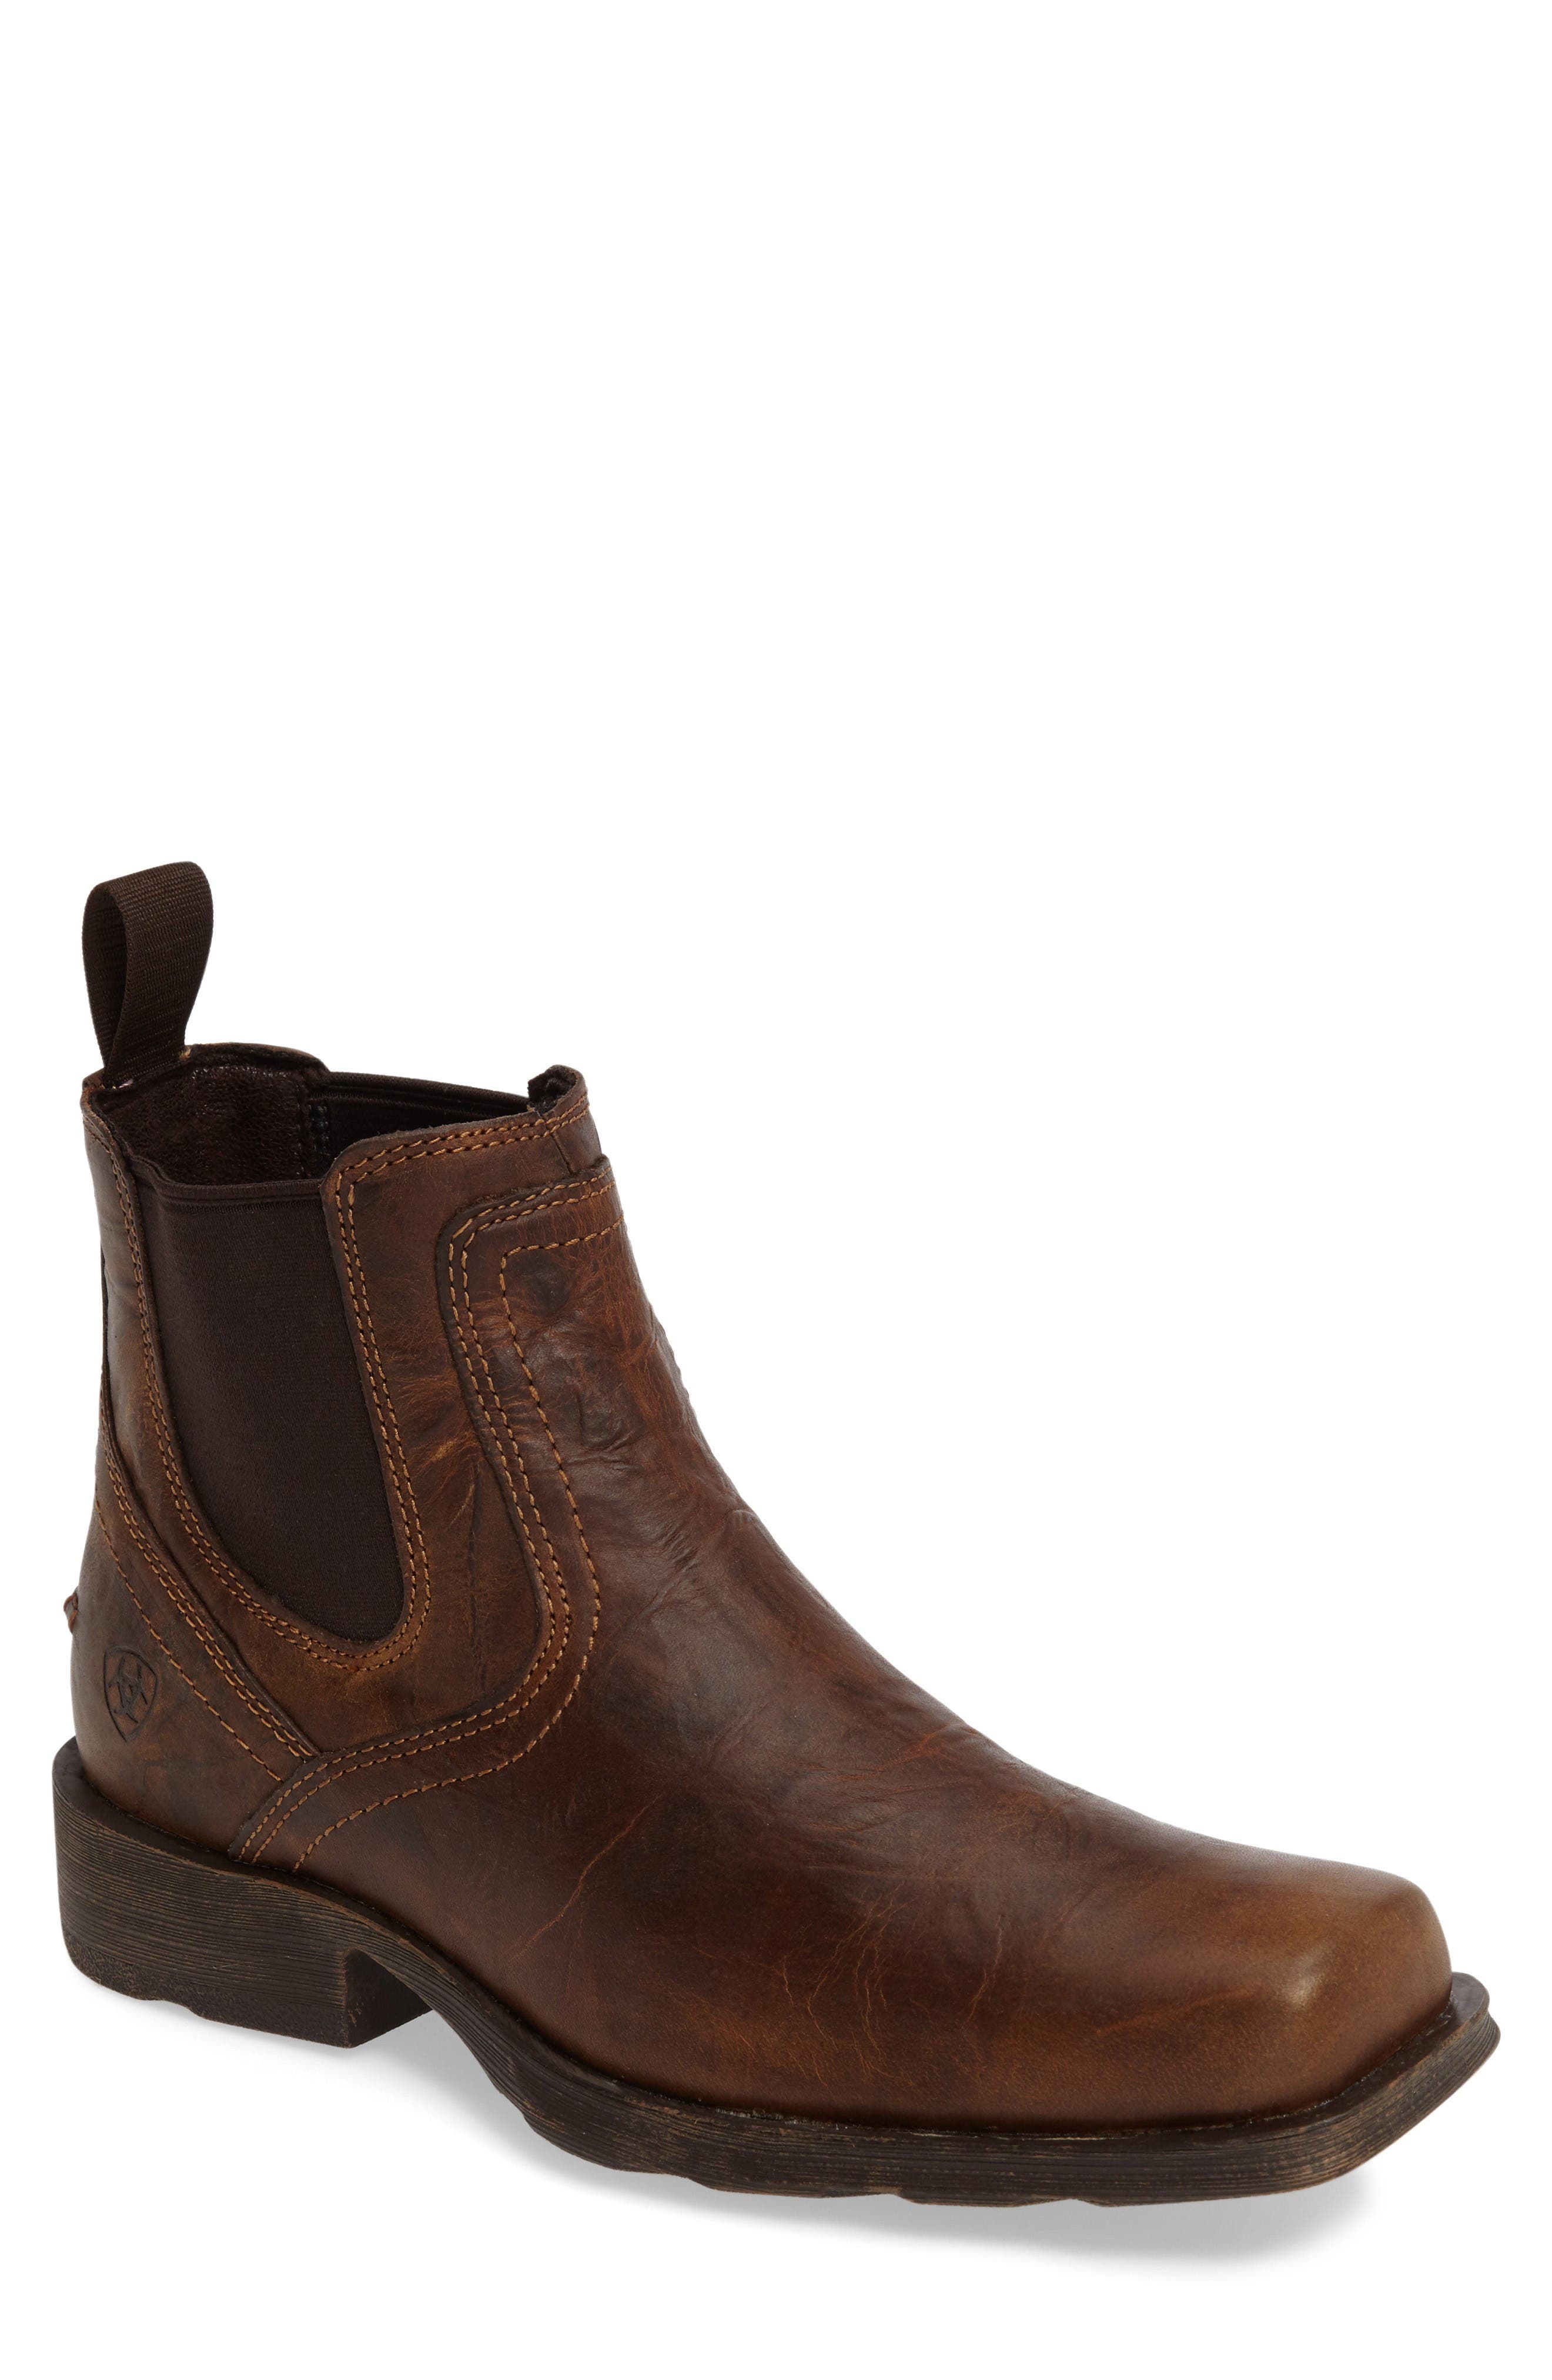 ariat boots sale clearance